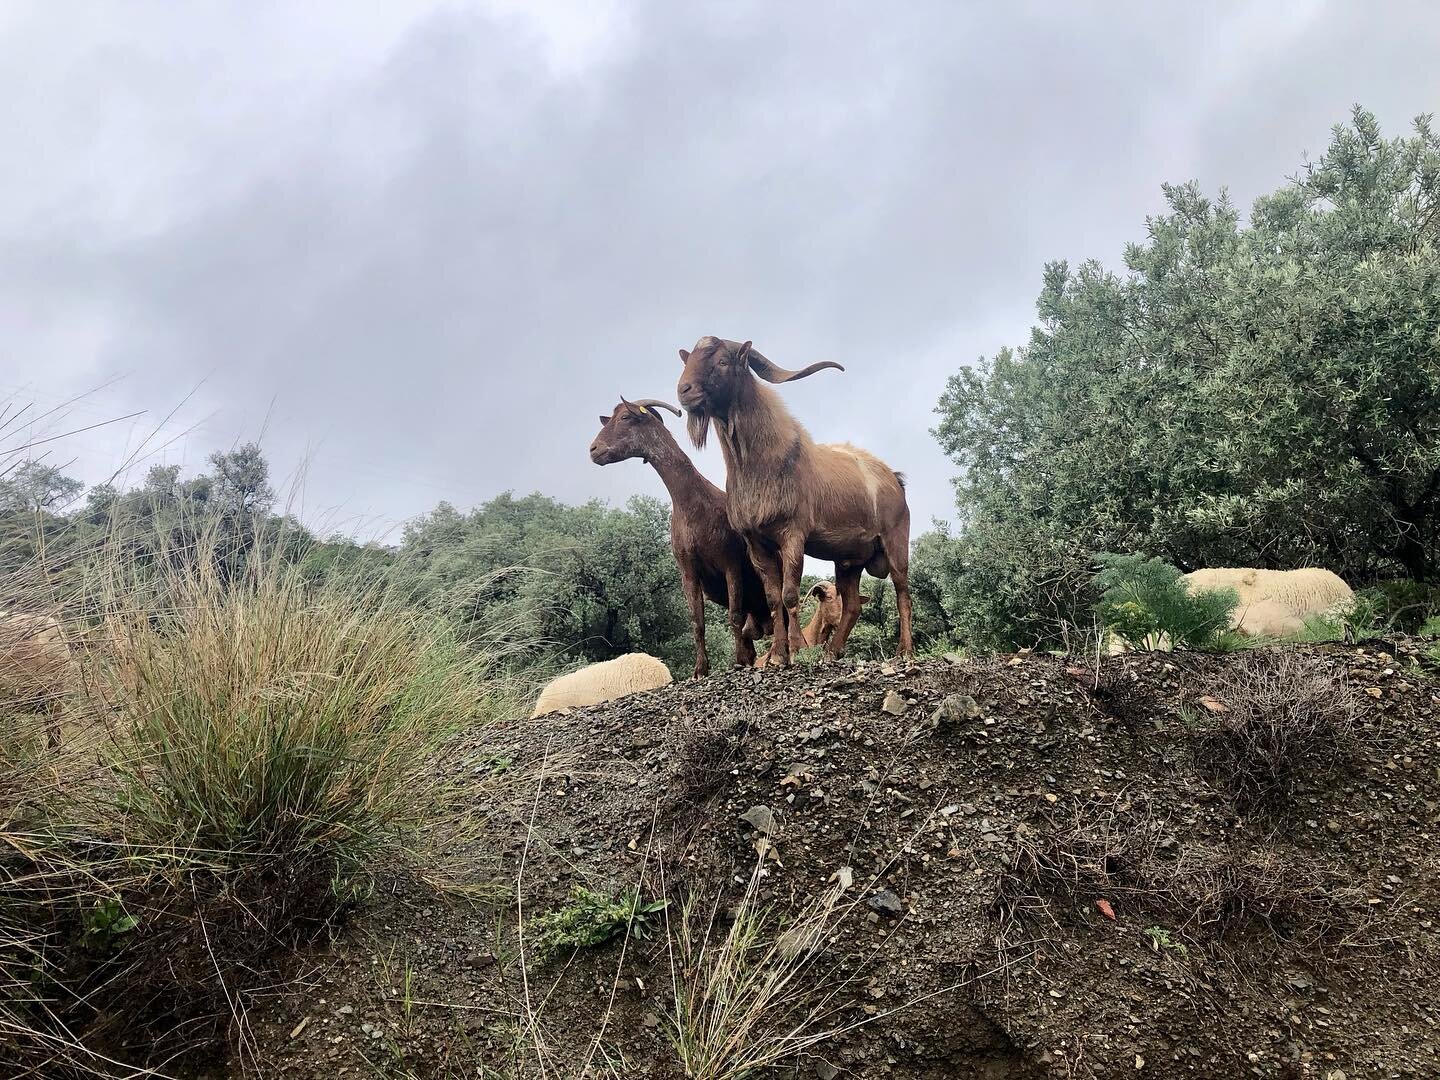 Ran into the goat herder this morning when I went for a walk with our dog Leia. The herd is big, but it is always easy to spot the leader. Look at those horns! 🤩
#shepherdsofinstagram #goatlife #hetspaansedorp #polopos